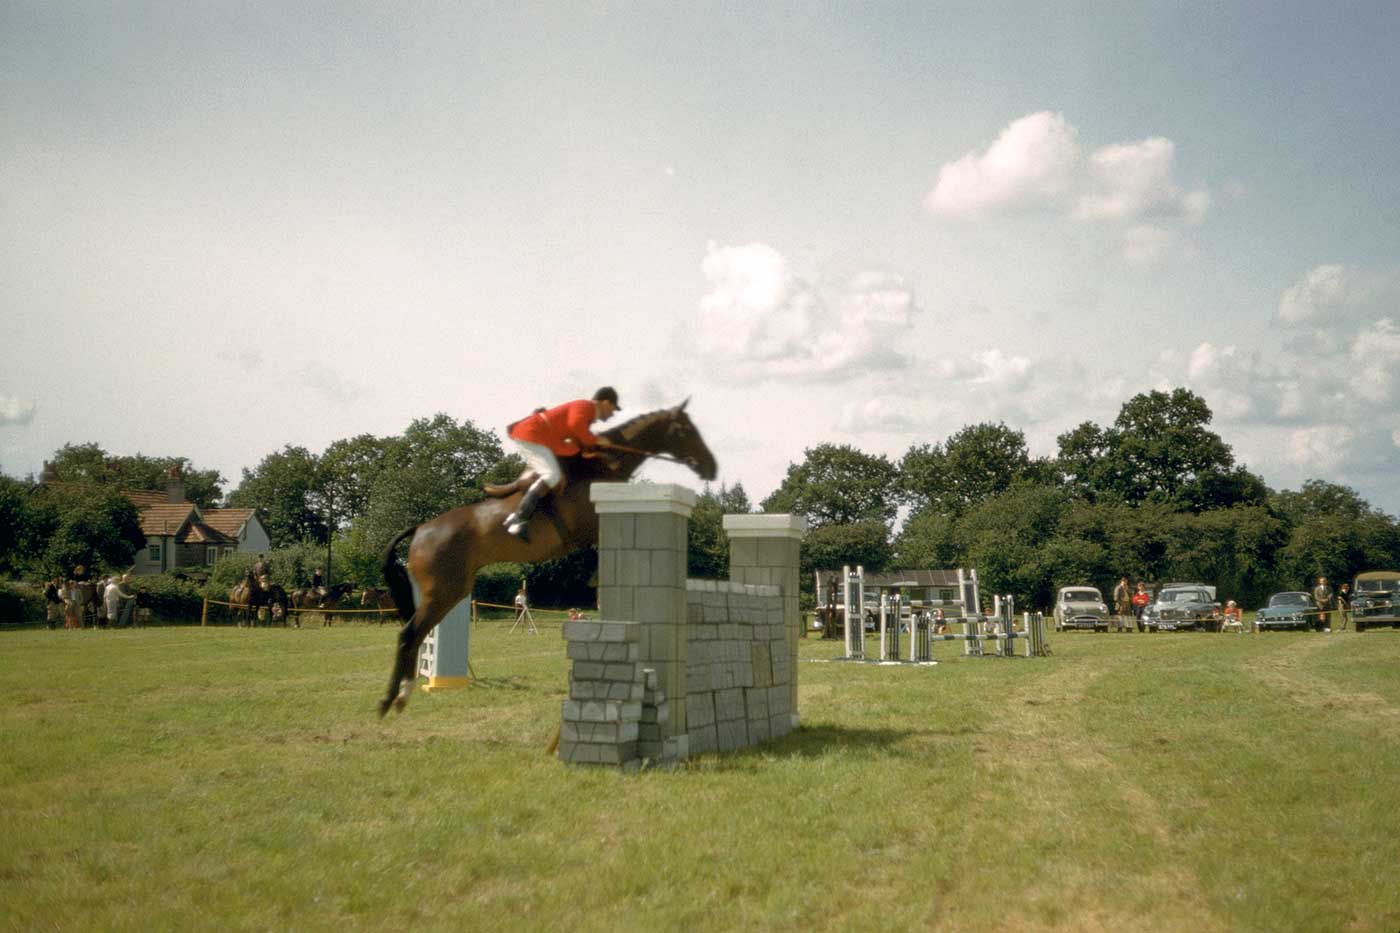 Neale Lavis on Mirrabooka at Badminton Horse Trials, England, April 1960 - click to view larger image